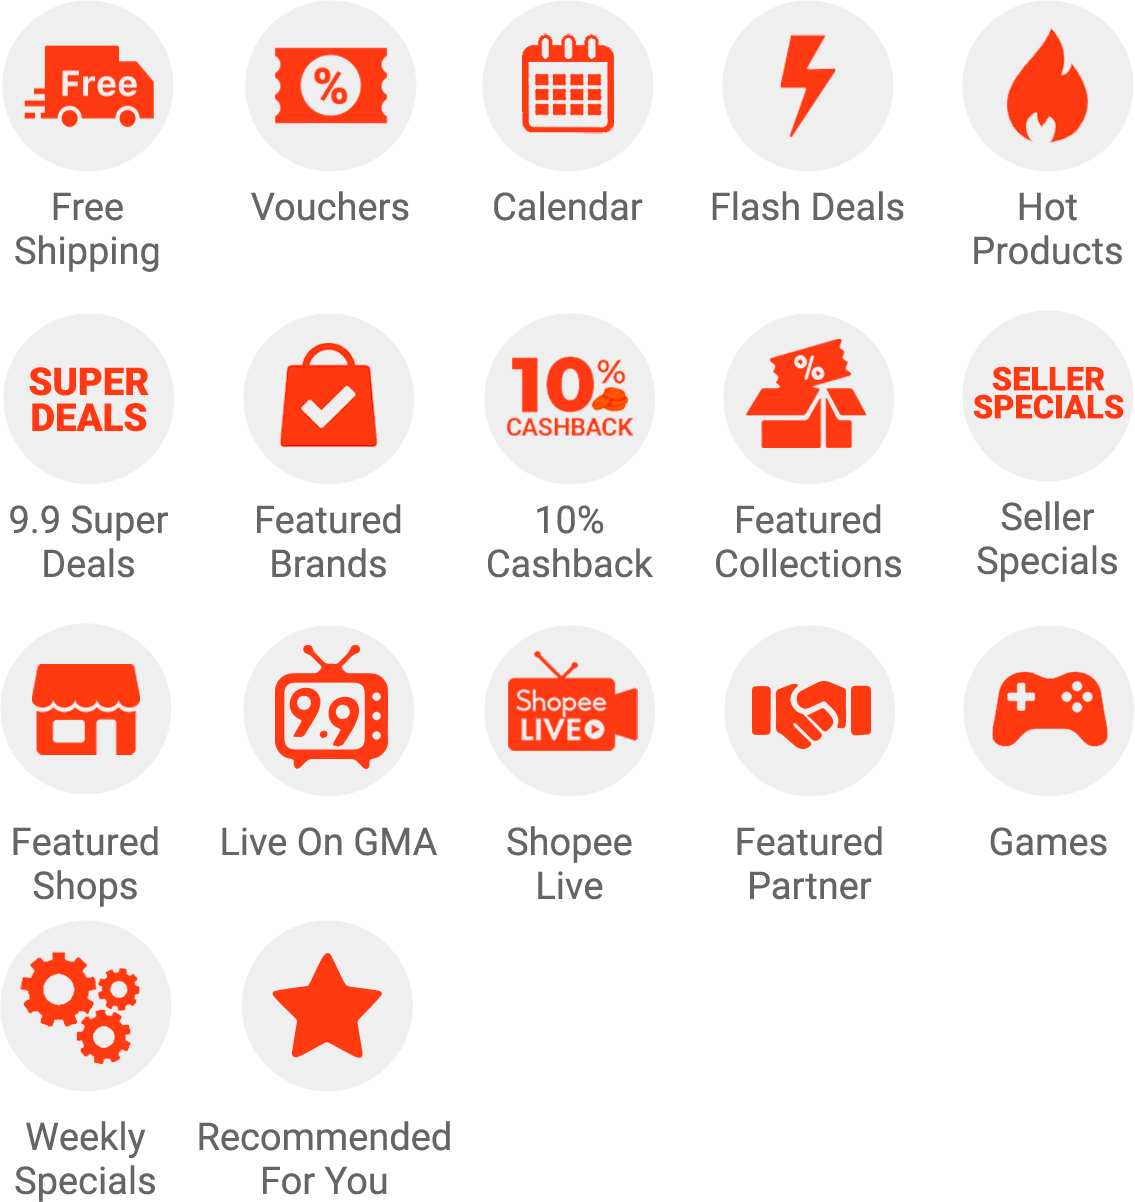 Check Out Shopee's Sale Schedule For Your Next Shopping Spree!